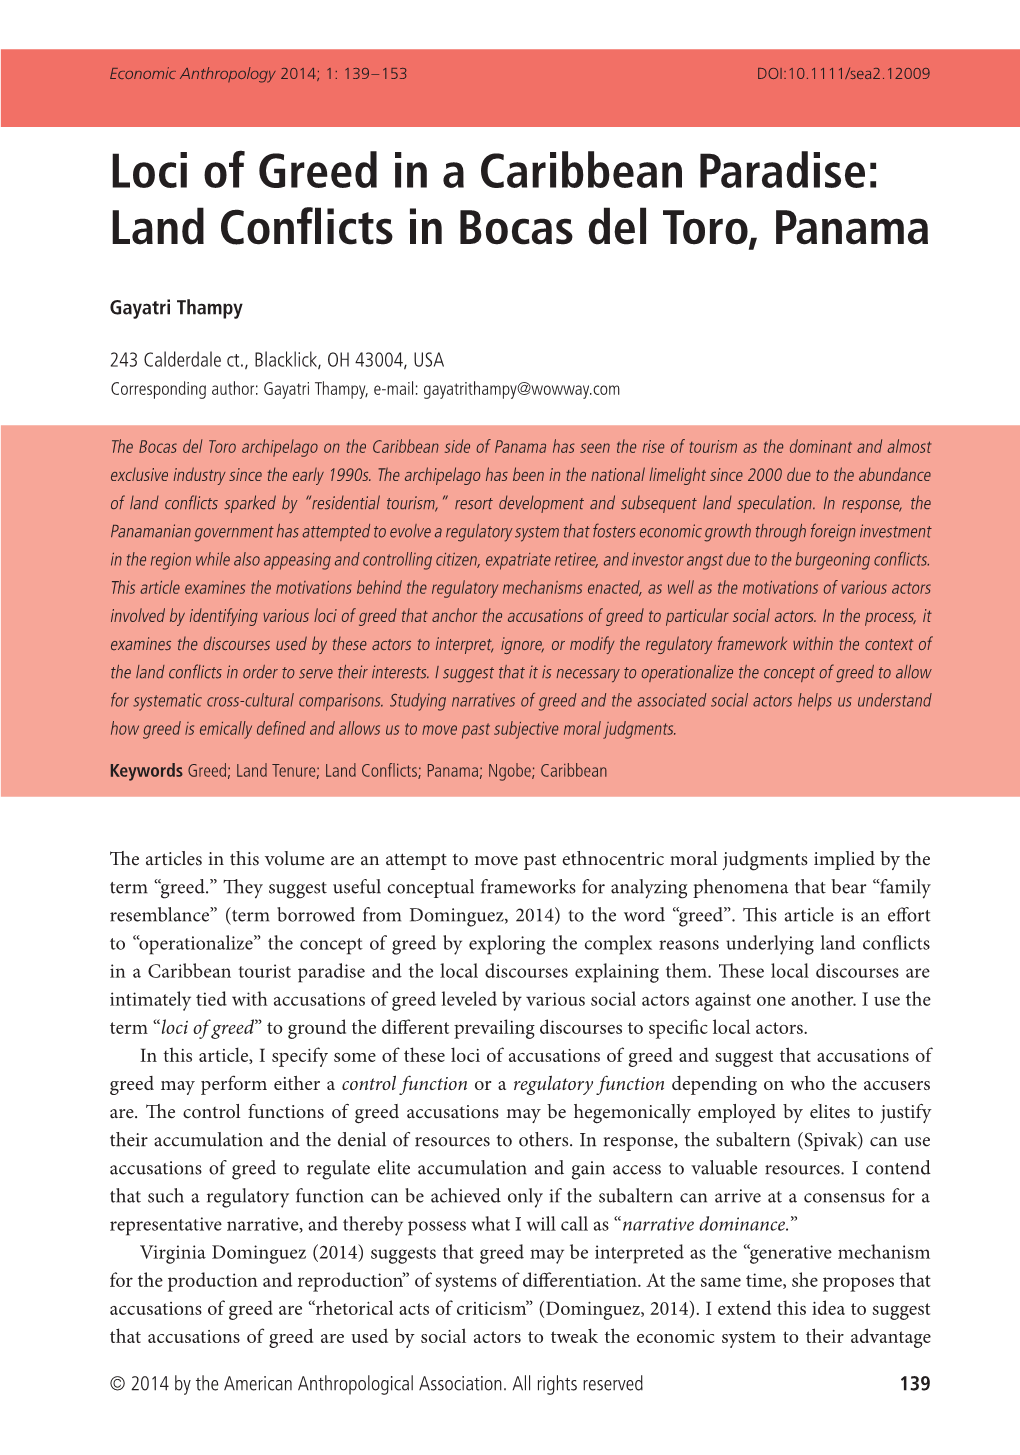 Land Conflicts in Bocas Del Toro, Panama, Are One Such Example